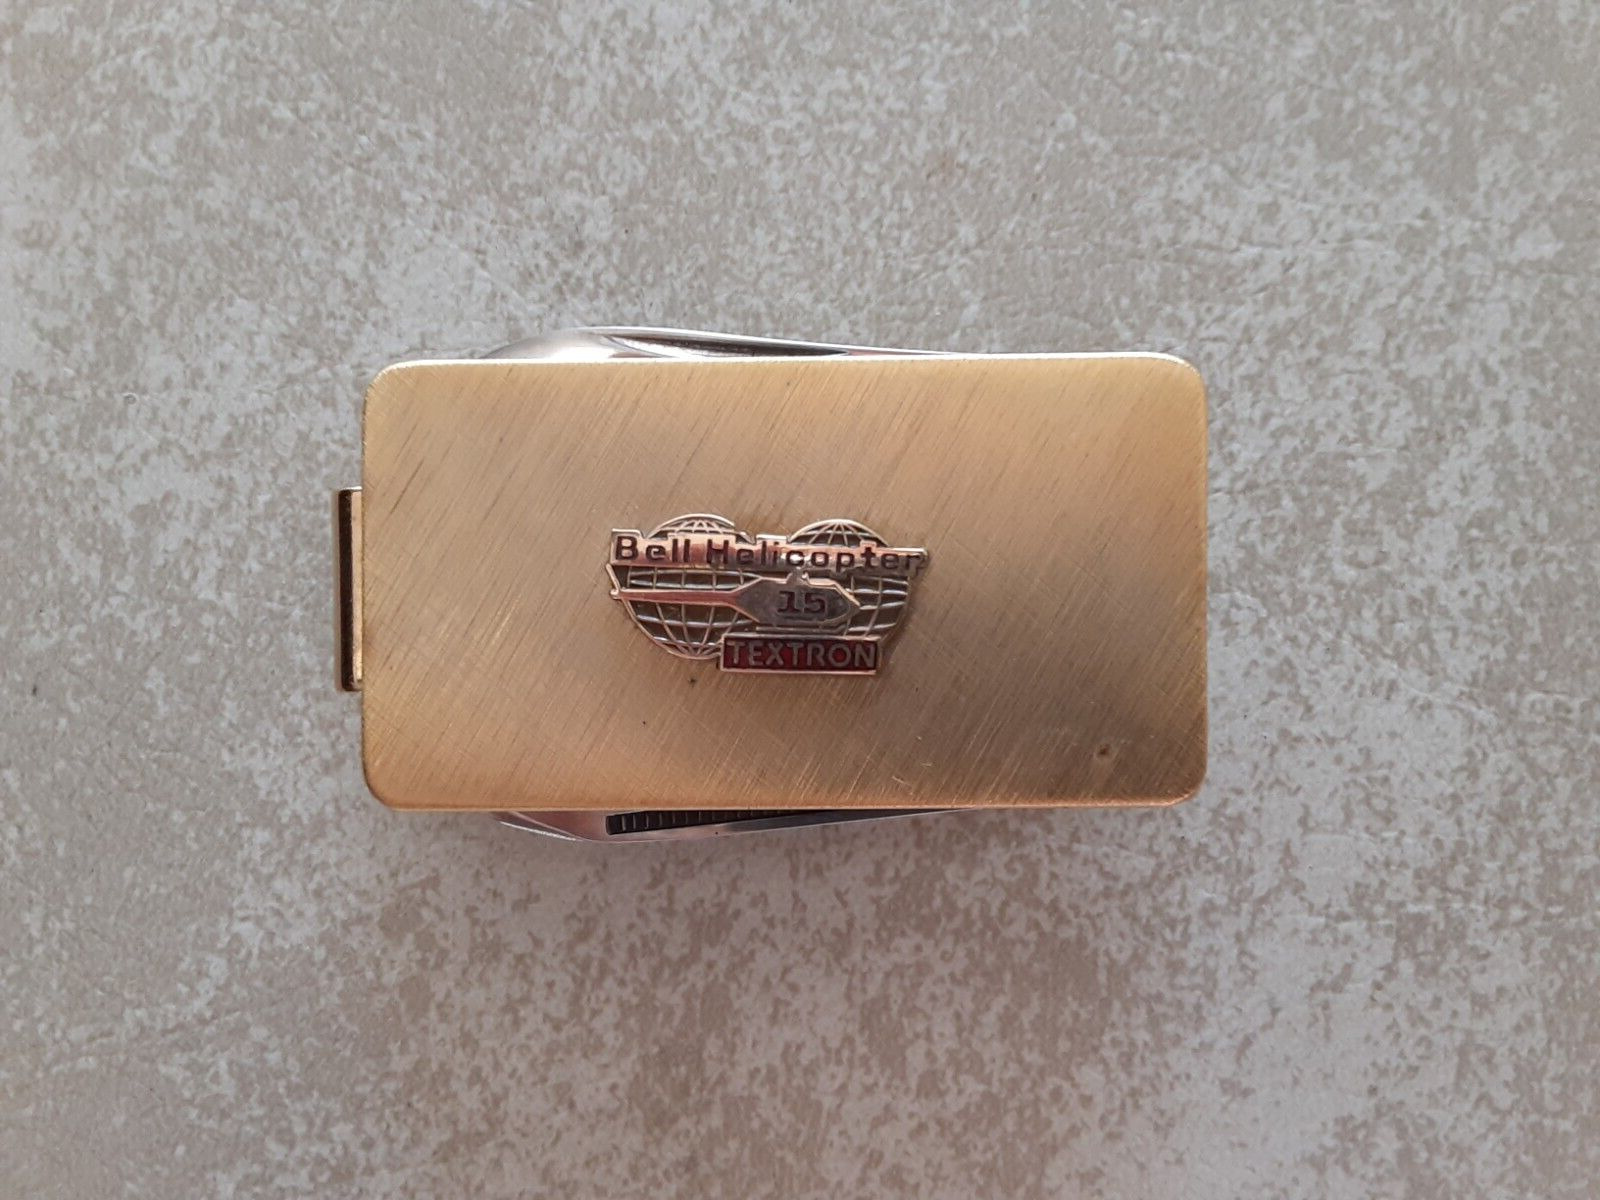 BELL HELICOPTER TEXTRON MONEY CLIP